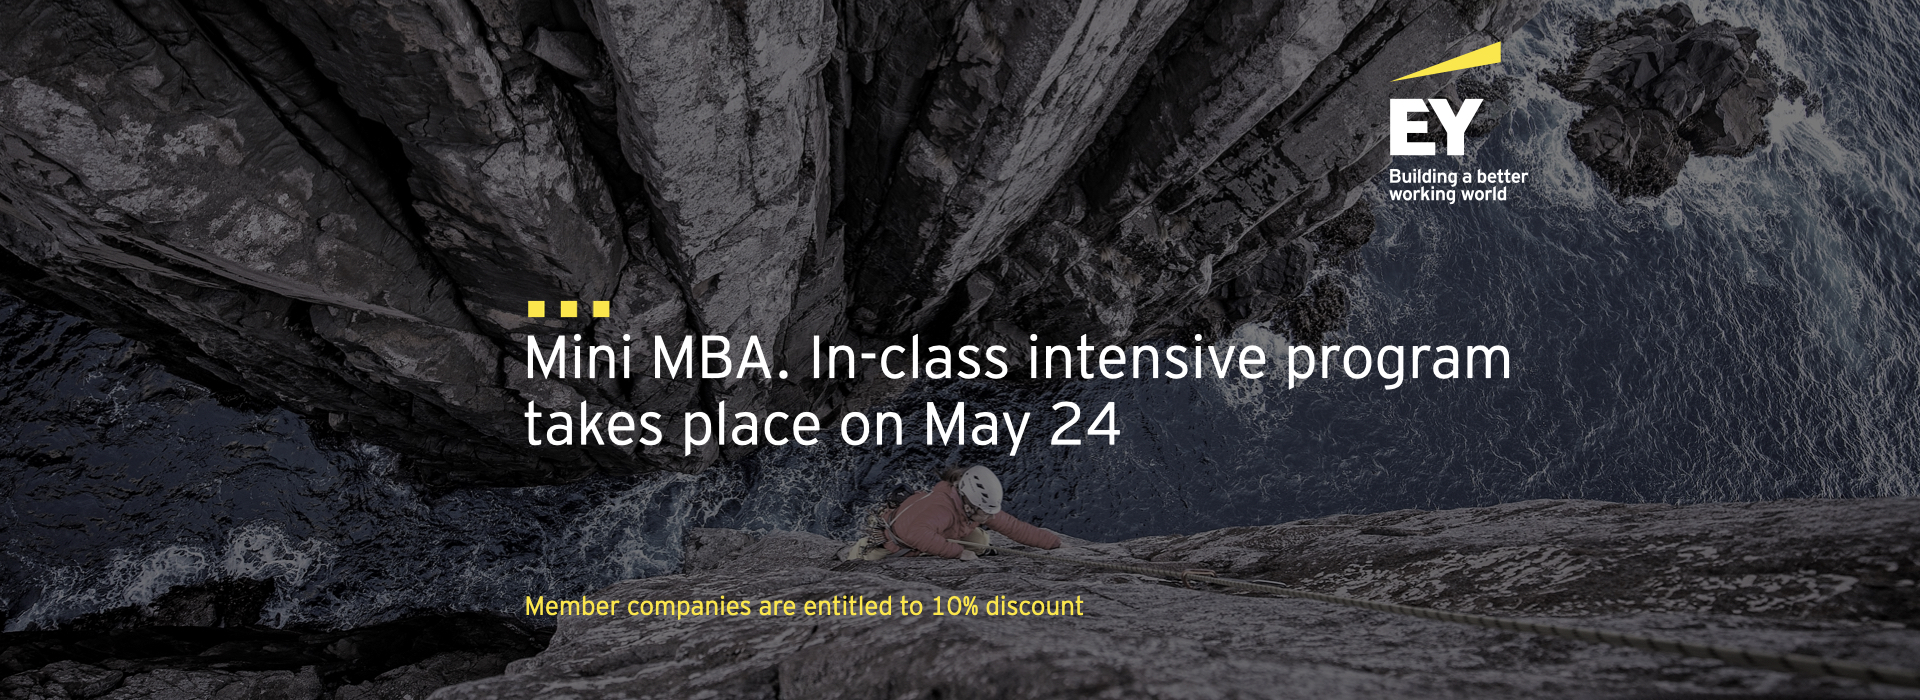 Mini MBA. In-class course at EY Academy of Business